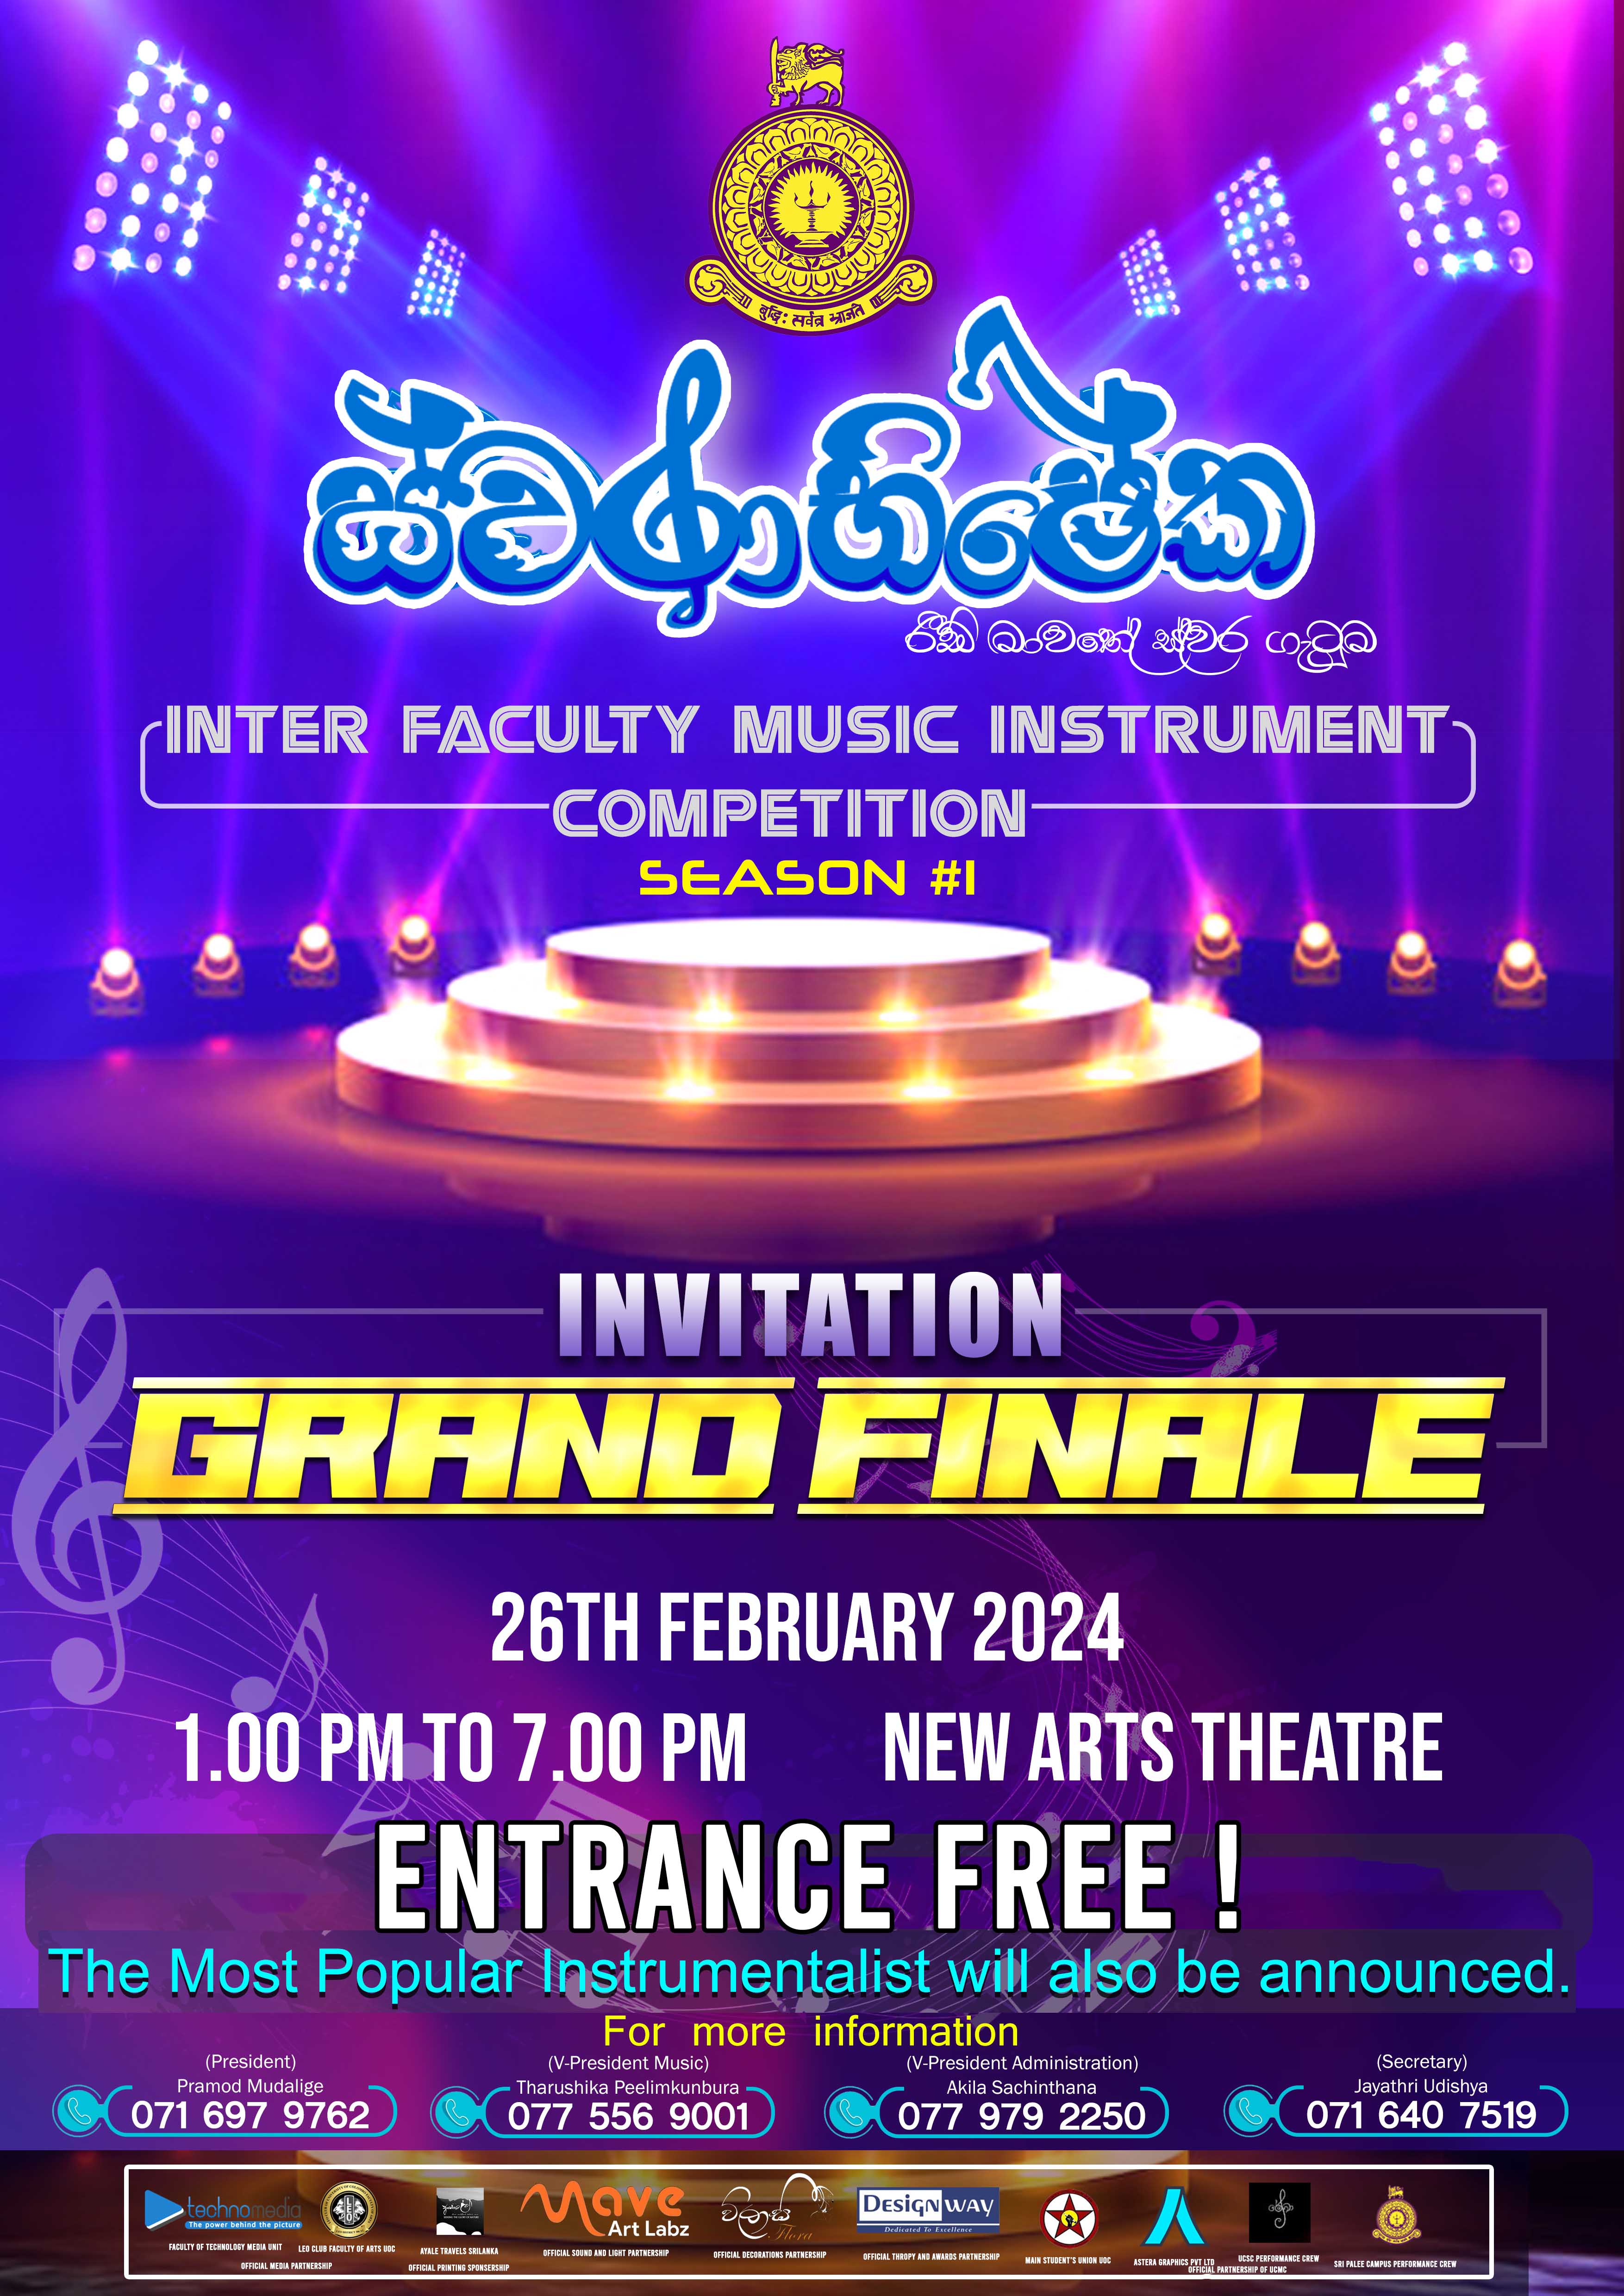 Invitation for the Grand Finale of Inter-Faculty Music Instrument Competition